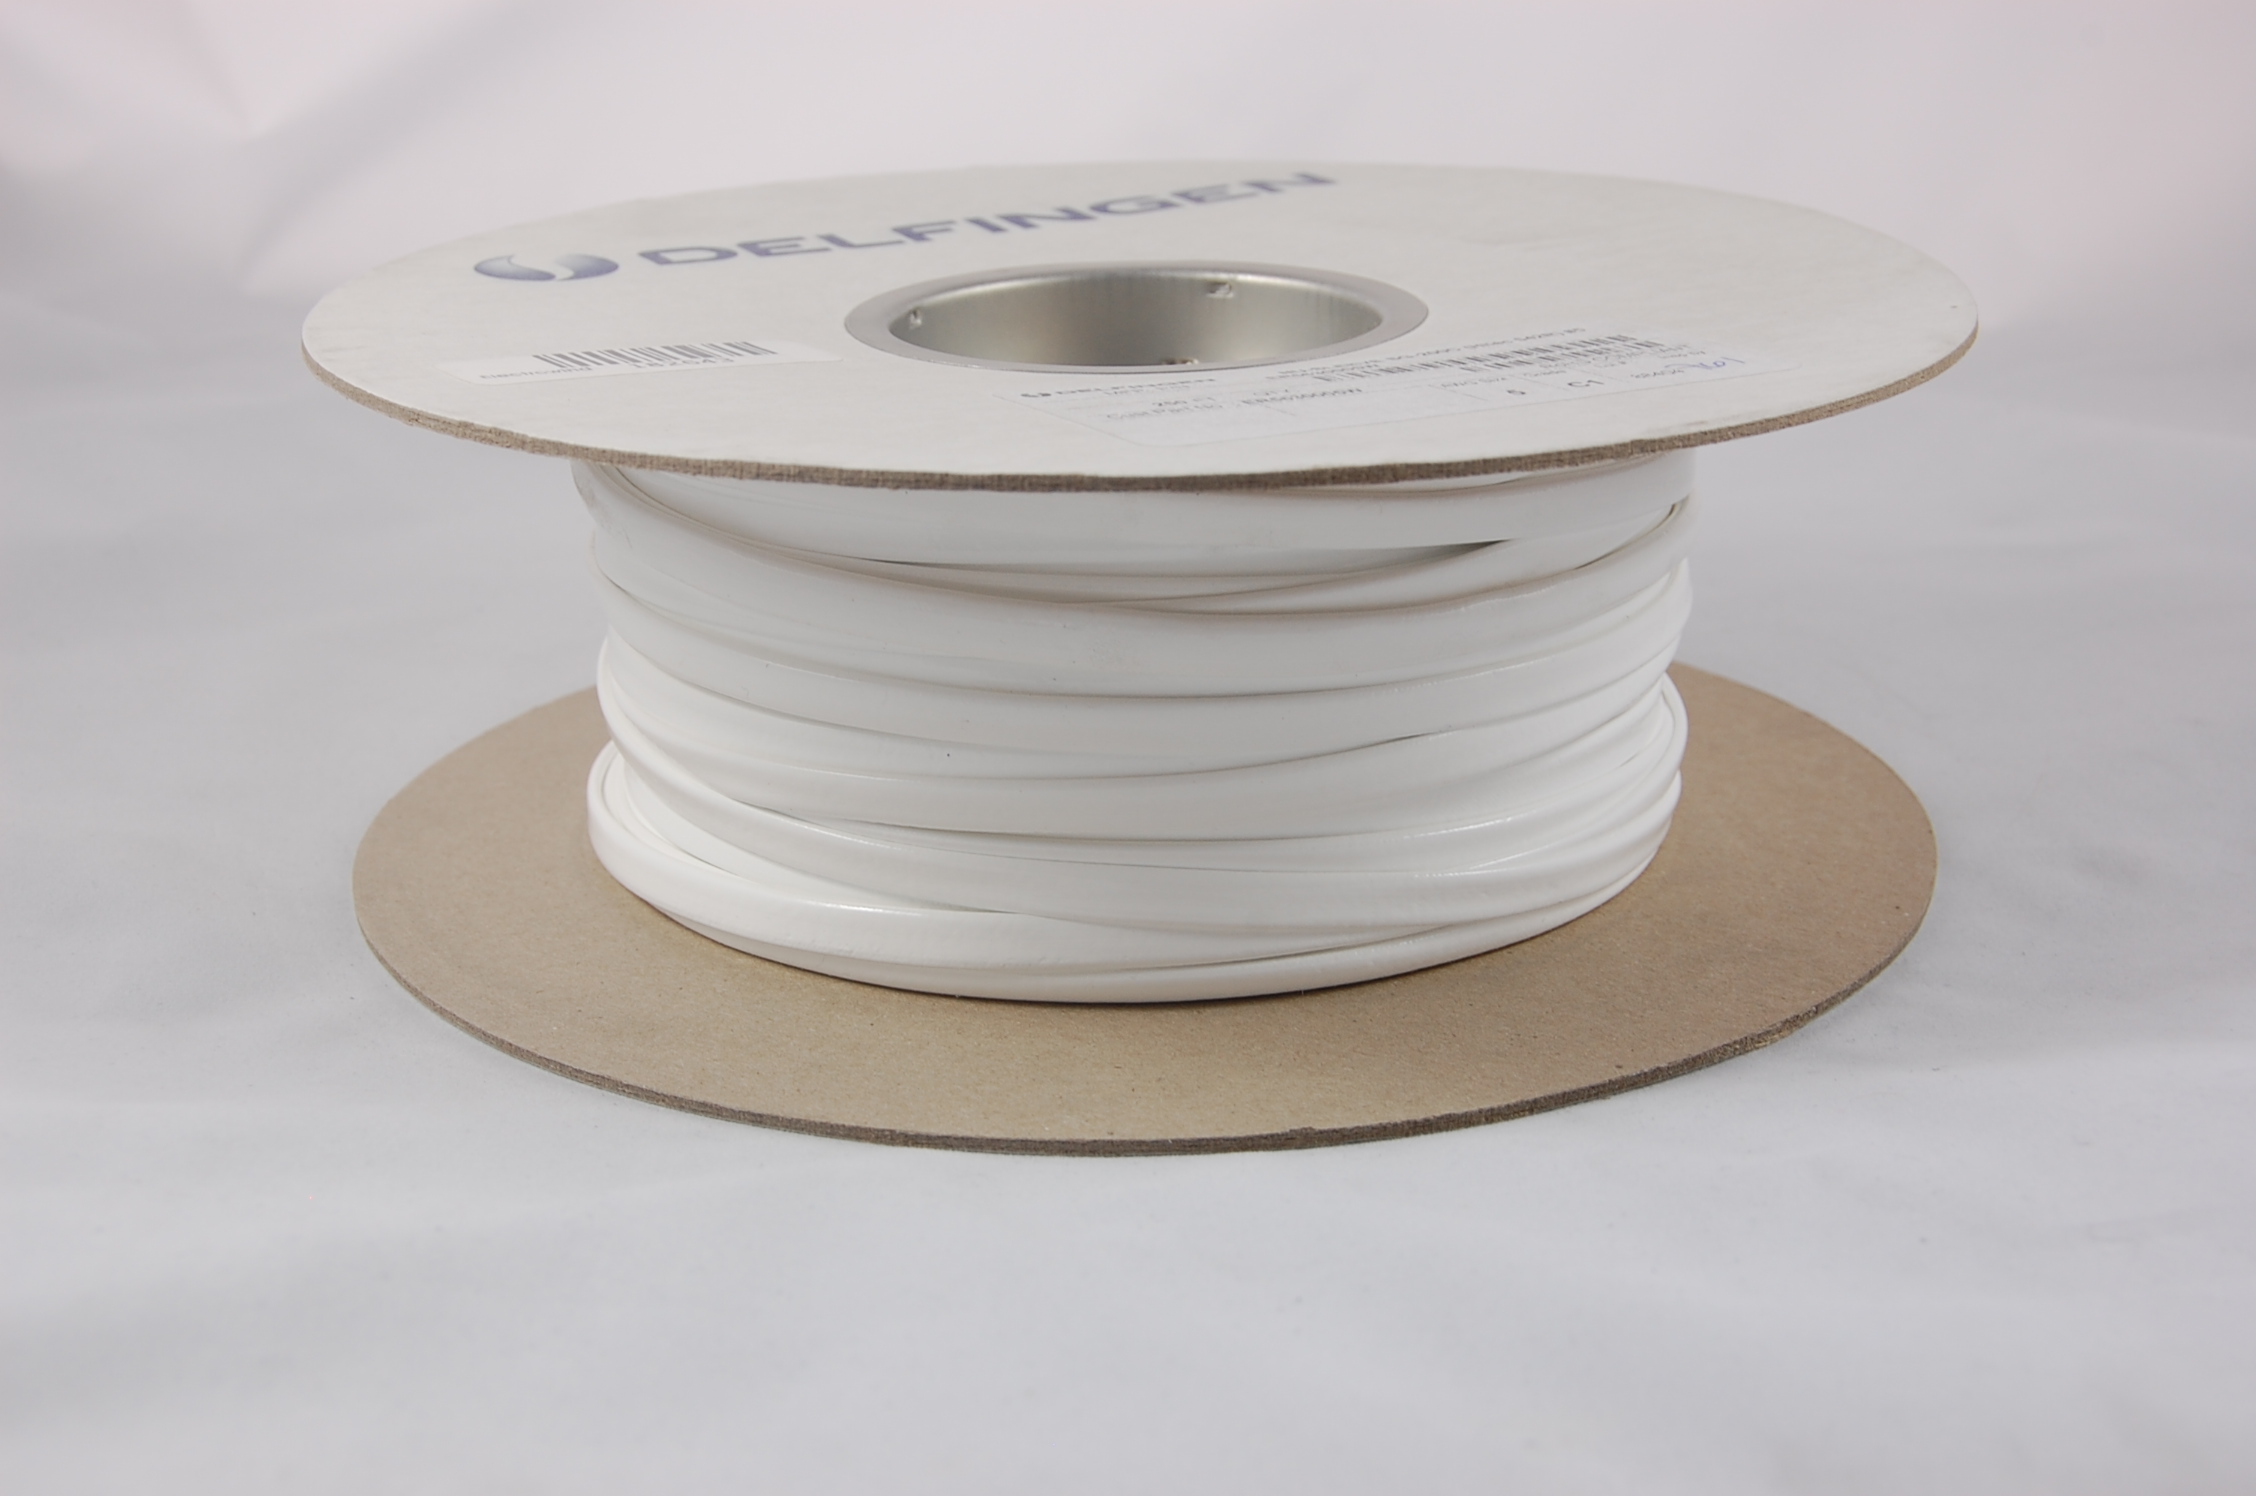 #15 AWG NU-SLEEVE SG-200 C-1 (2500V) Silicone Rubber Coated Braided Fiberglass Sleeving (542F) 200°C, white, 500 FT per spool